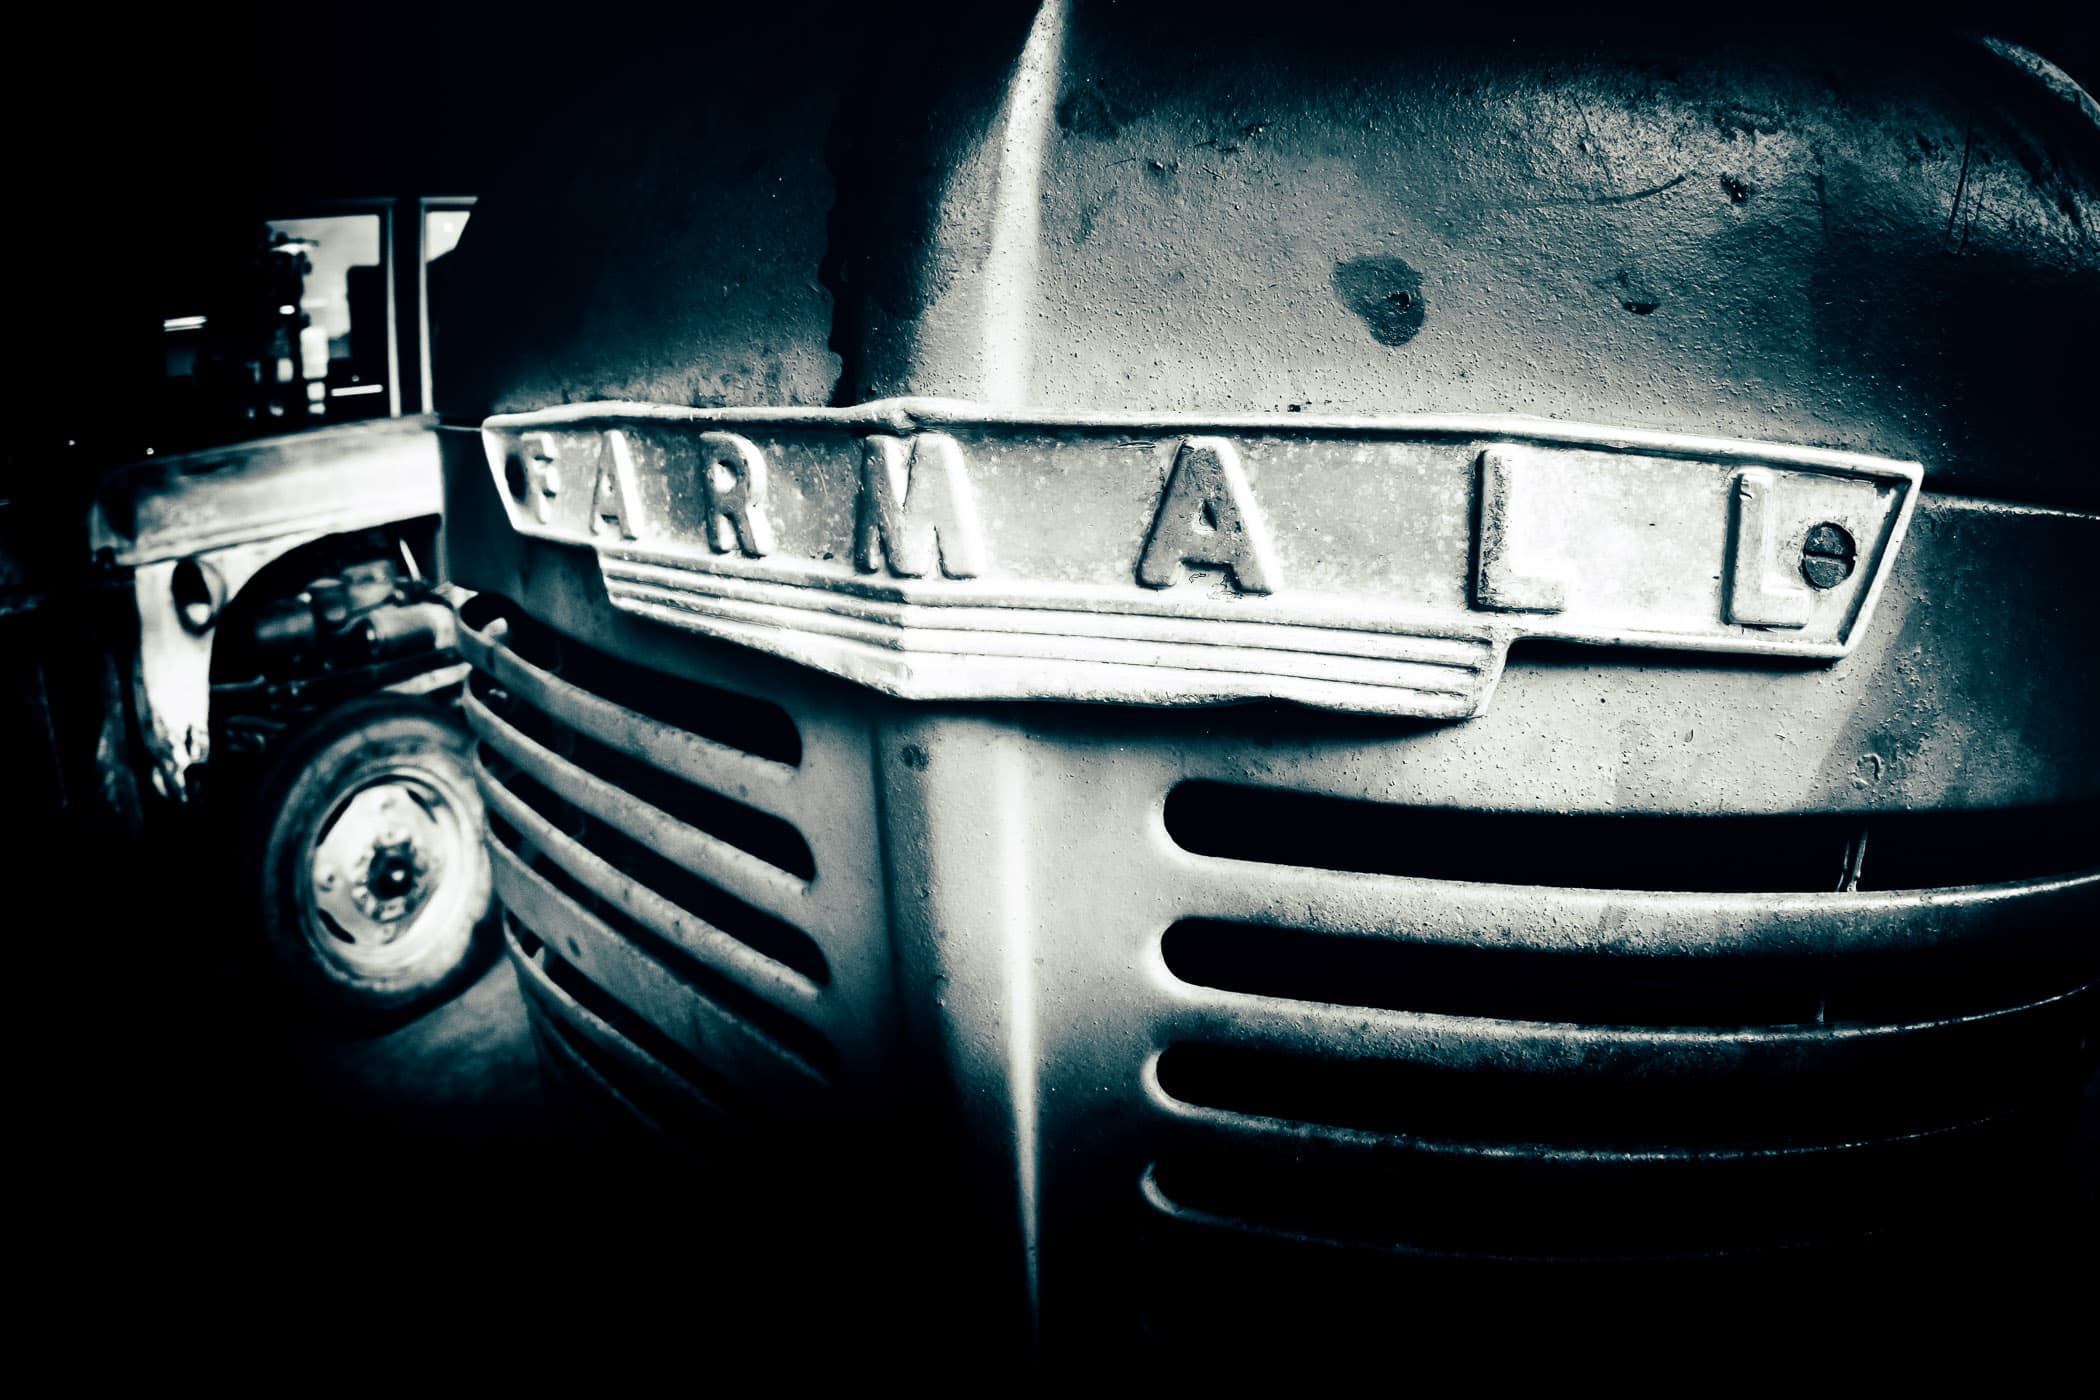 Detail of an old International Harvester Farmall tractor, spotted in Downtown McKinney, Texas.